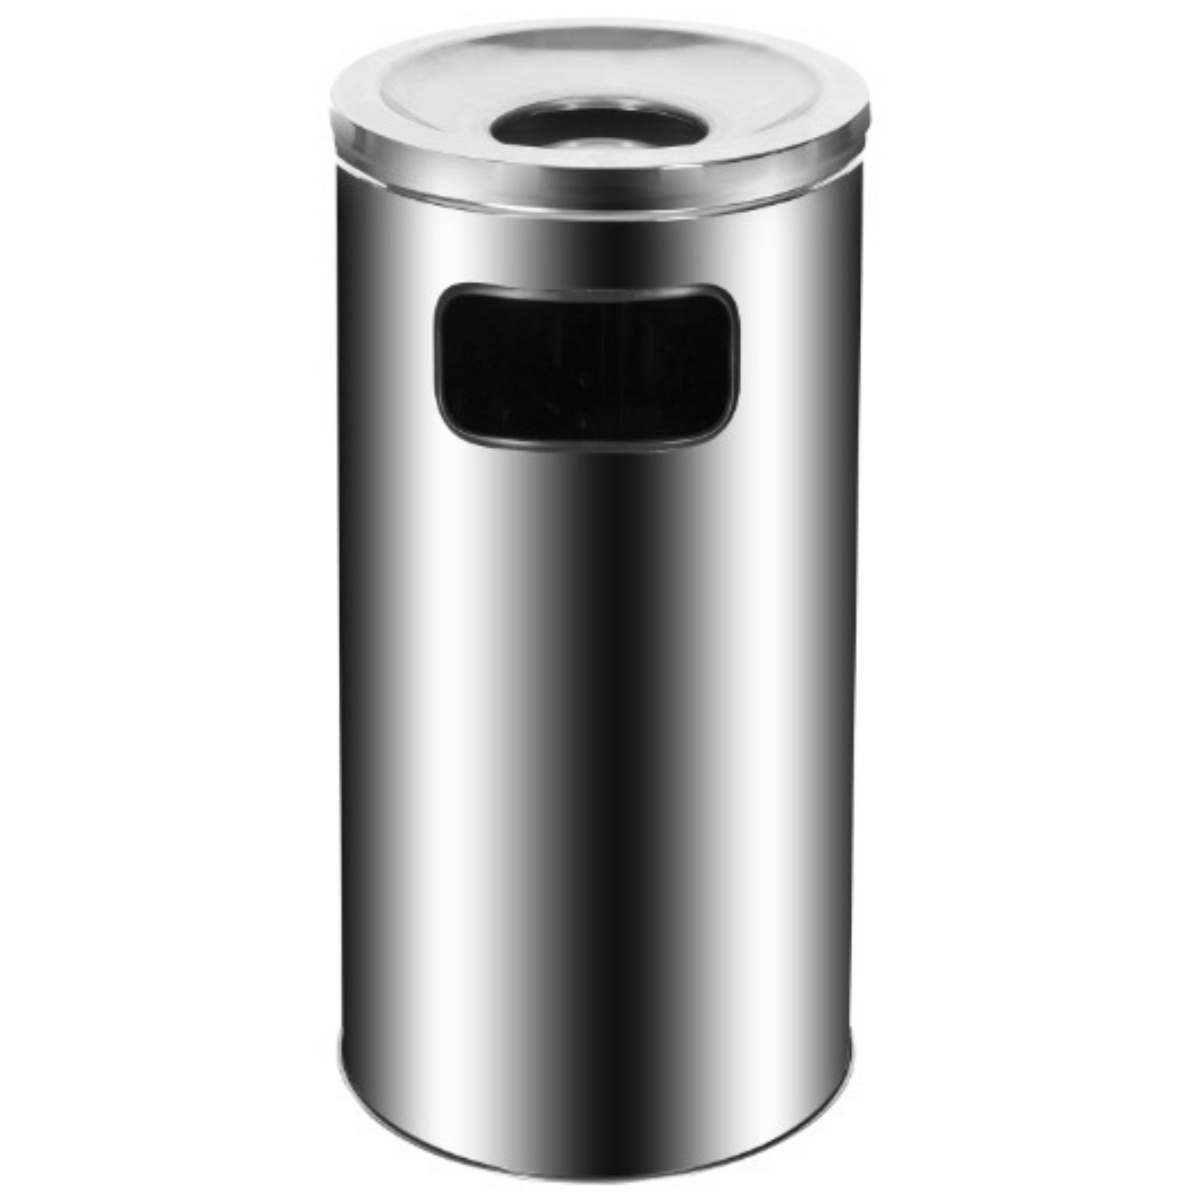 AB-401 Outdoor Dustbin product logo